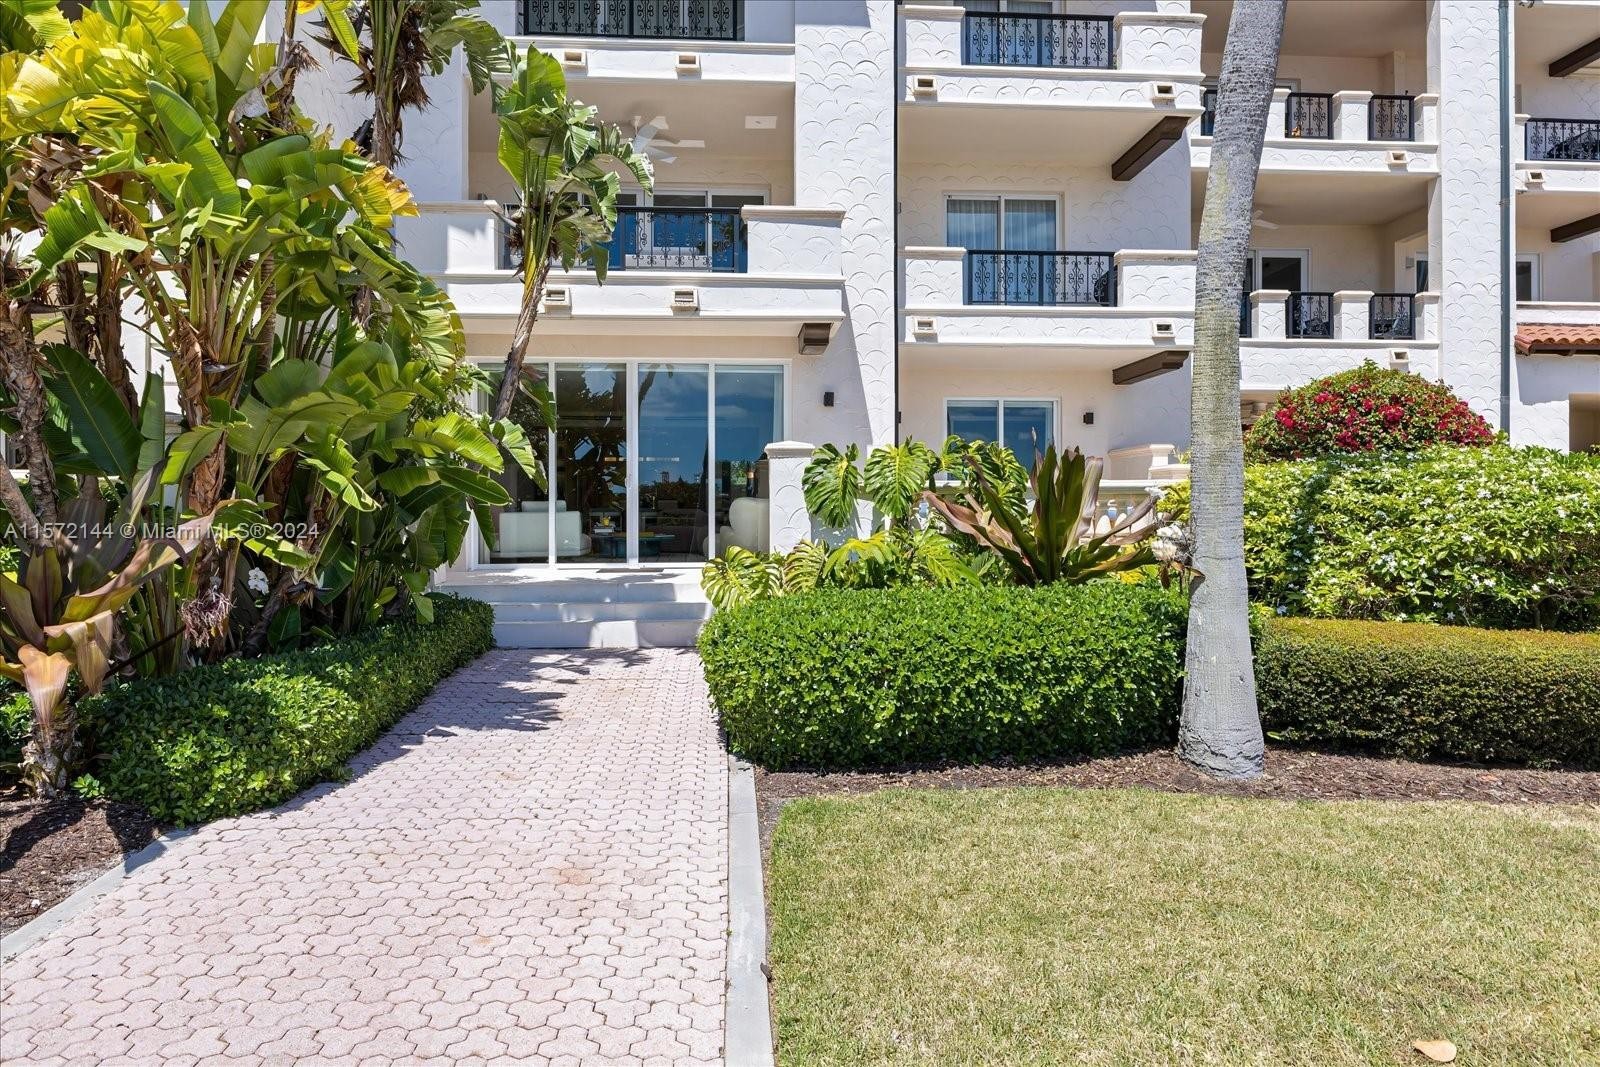 35. 2113 Fisher Island Dr